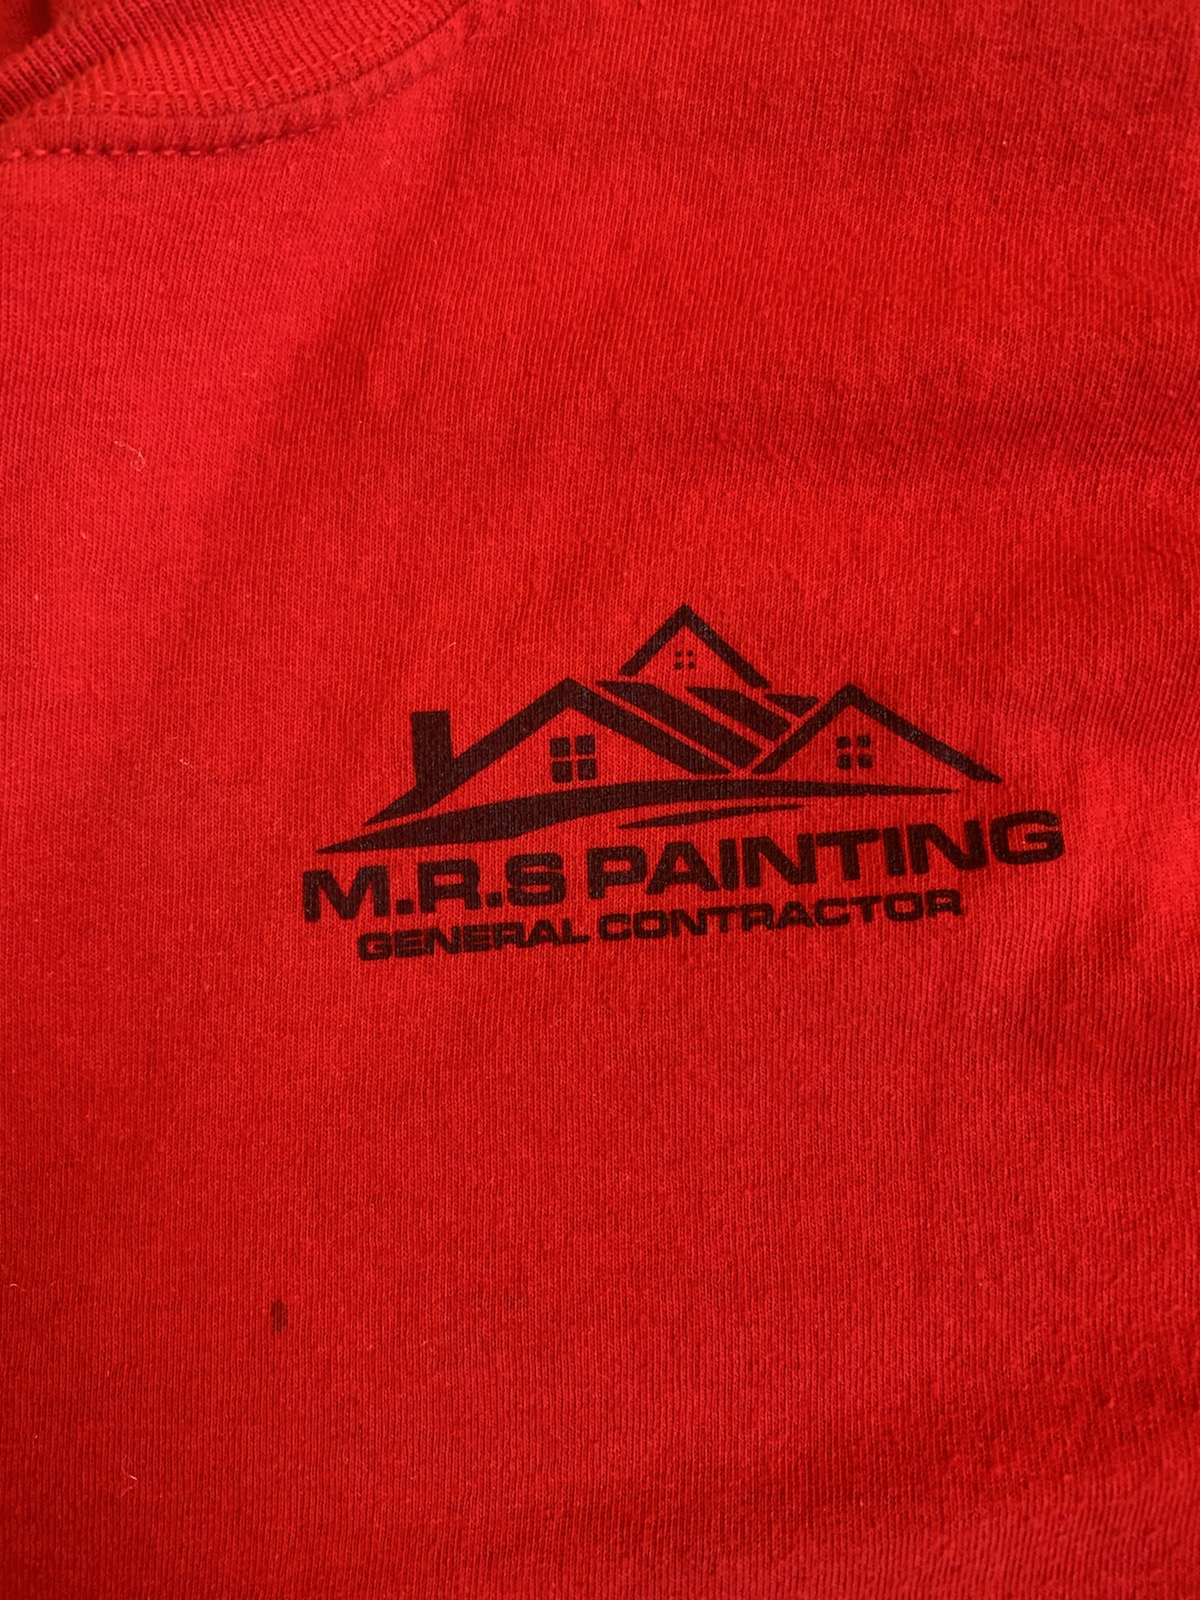 Gallery Image: M.R.S. Painting General Contractors